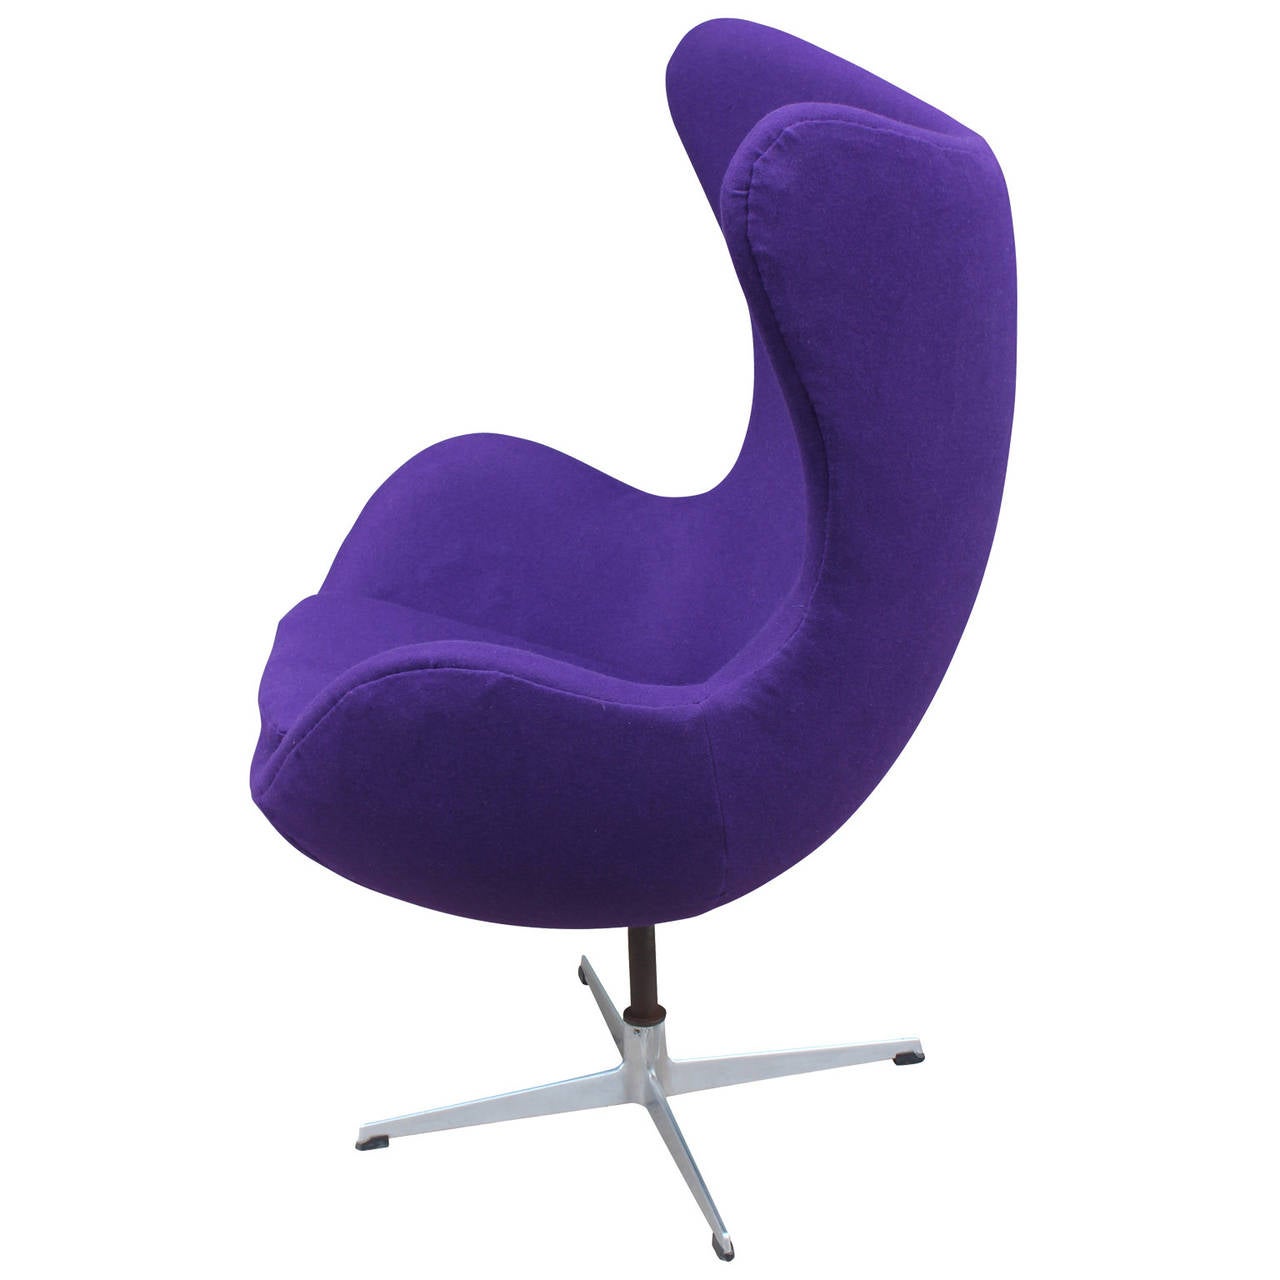 Beautiful Arne Jacobsen designed egg chair for the SAS hotel in Copenhagen is an incredible take on the classic wingback. Newly upholstered in royal purple Danish divina wool. This was a custom order chair with a taller seating height for a Houston